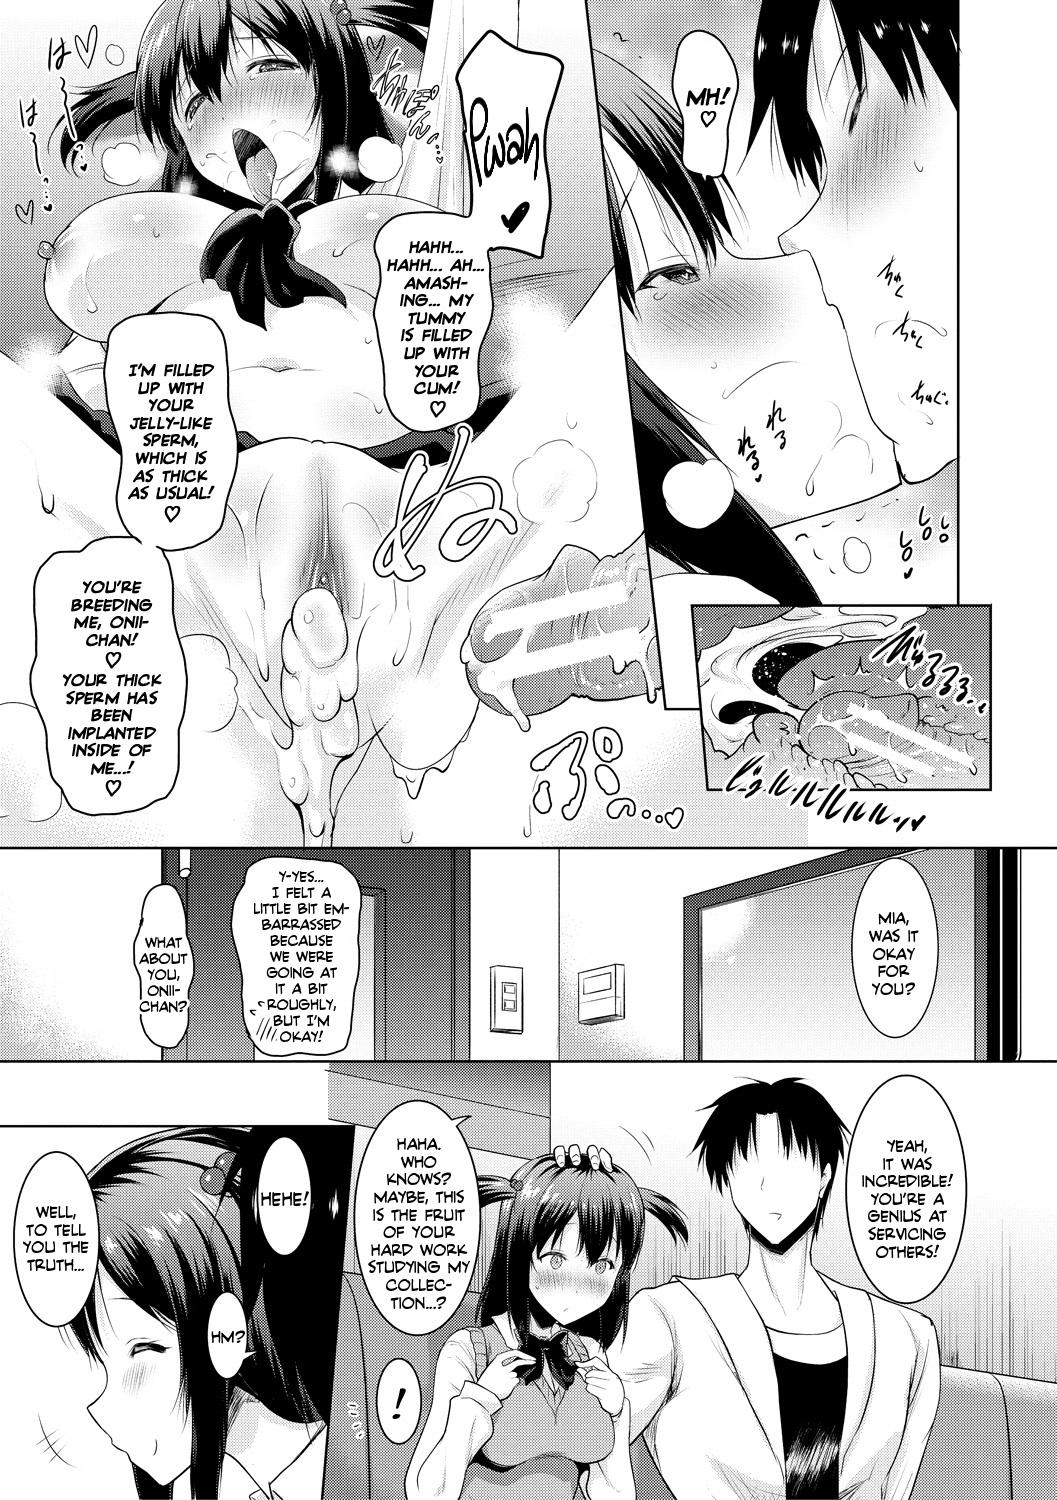 [Pony-R] I Can't Live Without My Little Sister's Tongue Chapter 01-02 + Secret Baby-making Sex with a Big-titted Mother and Daughter! (Kyonyuu Oyako no Shita to Shikyuu ni Renzoku Shasei) [English] [Team Rabu2] [Digital] 39